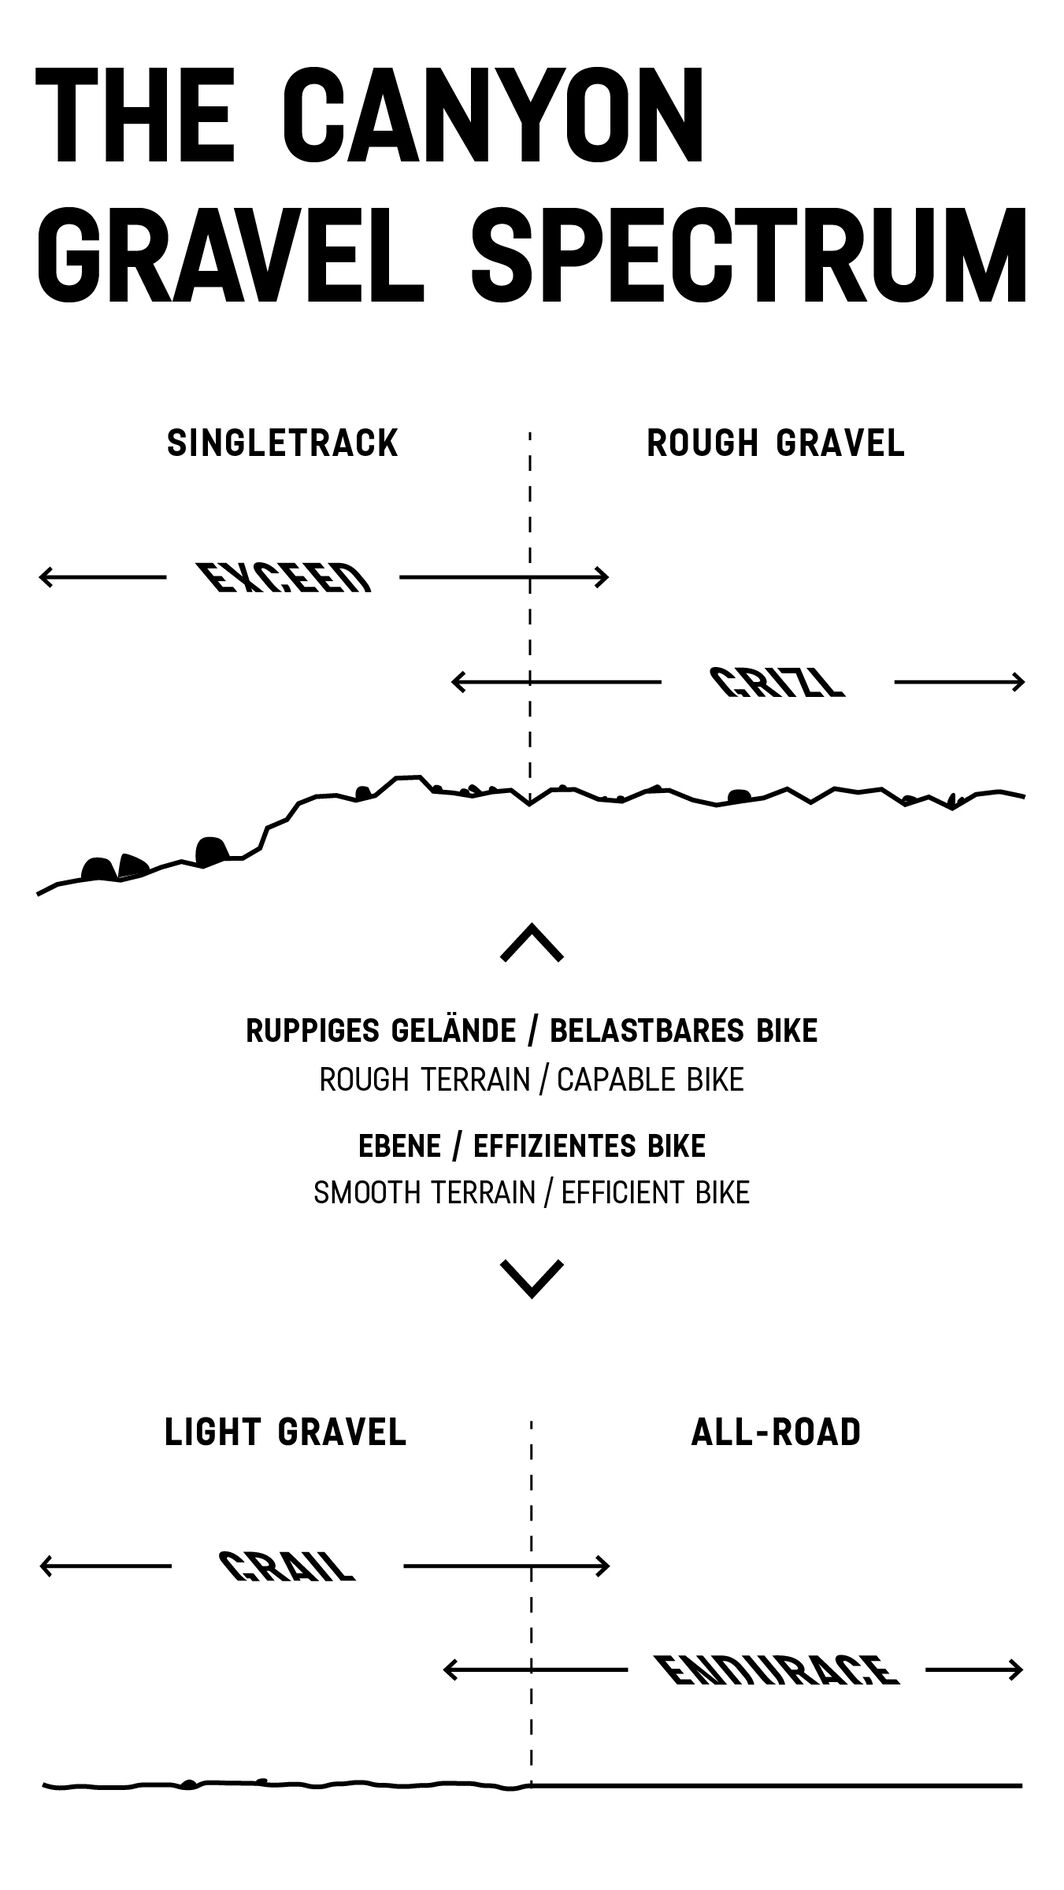 Infographic with the different types of gravel